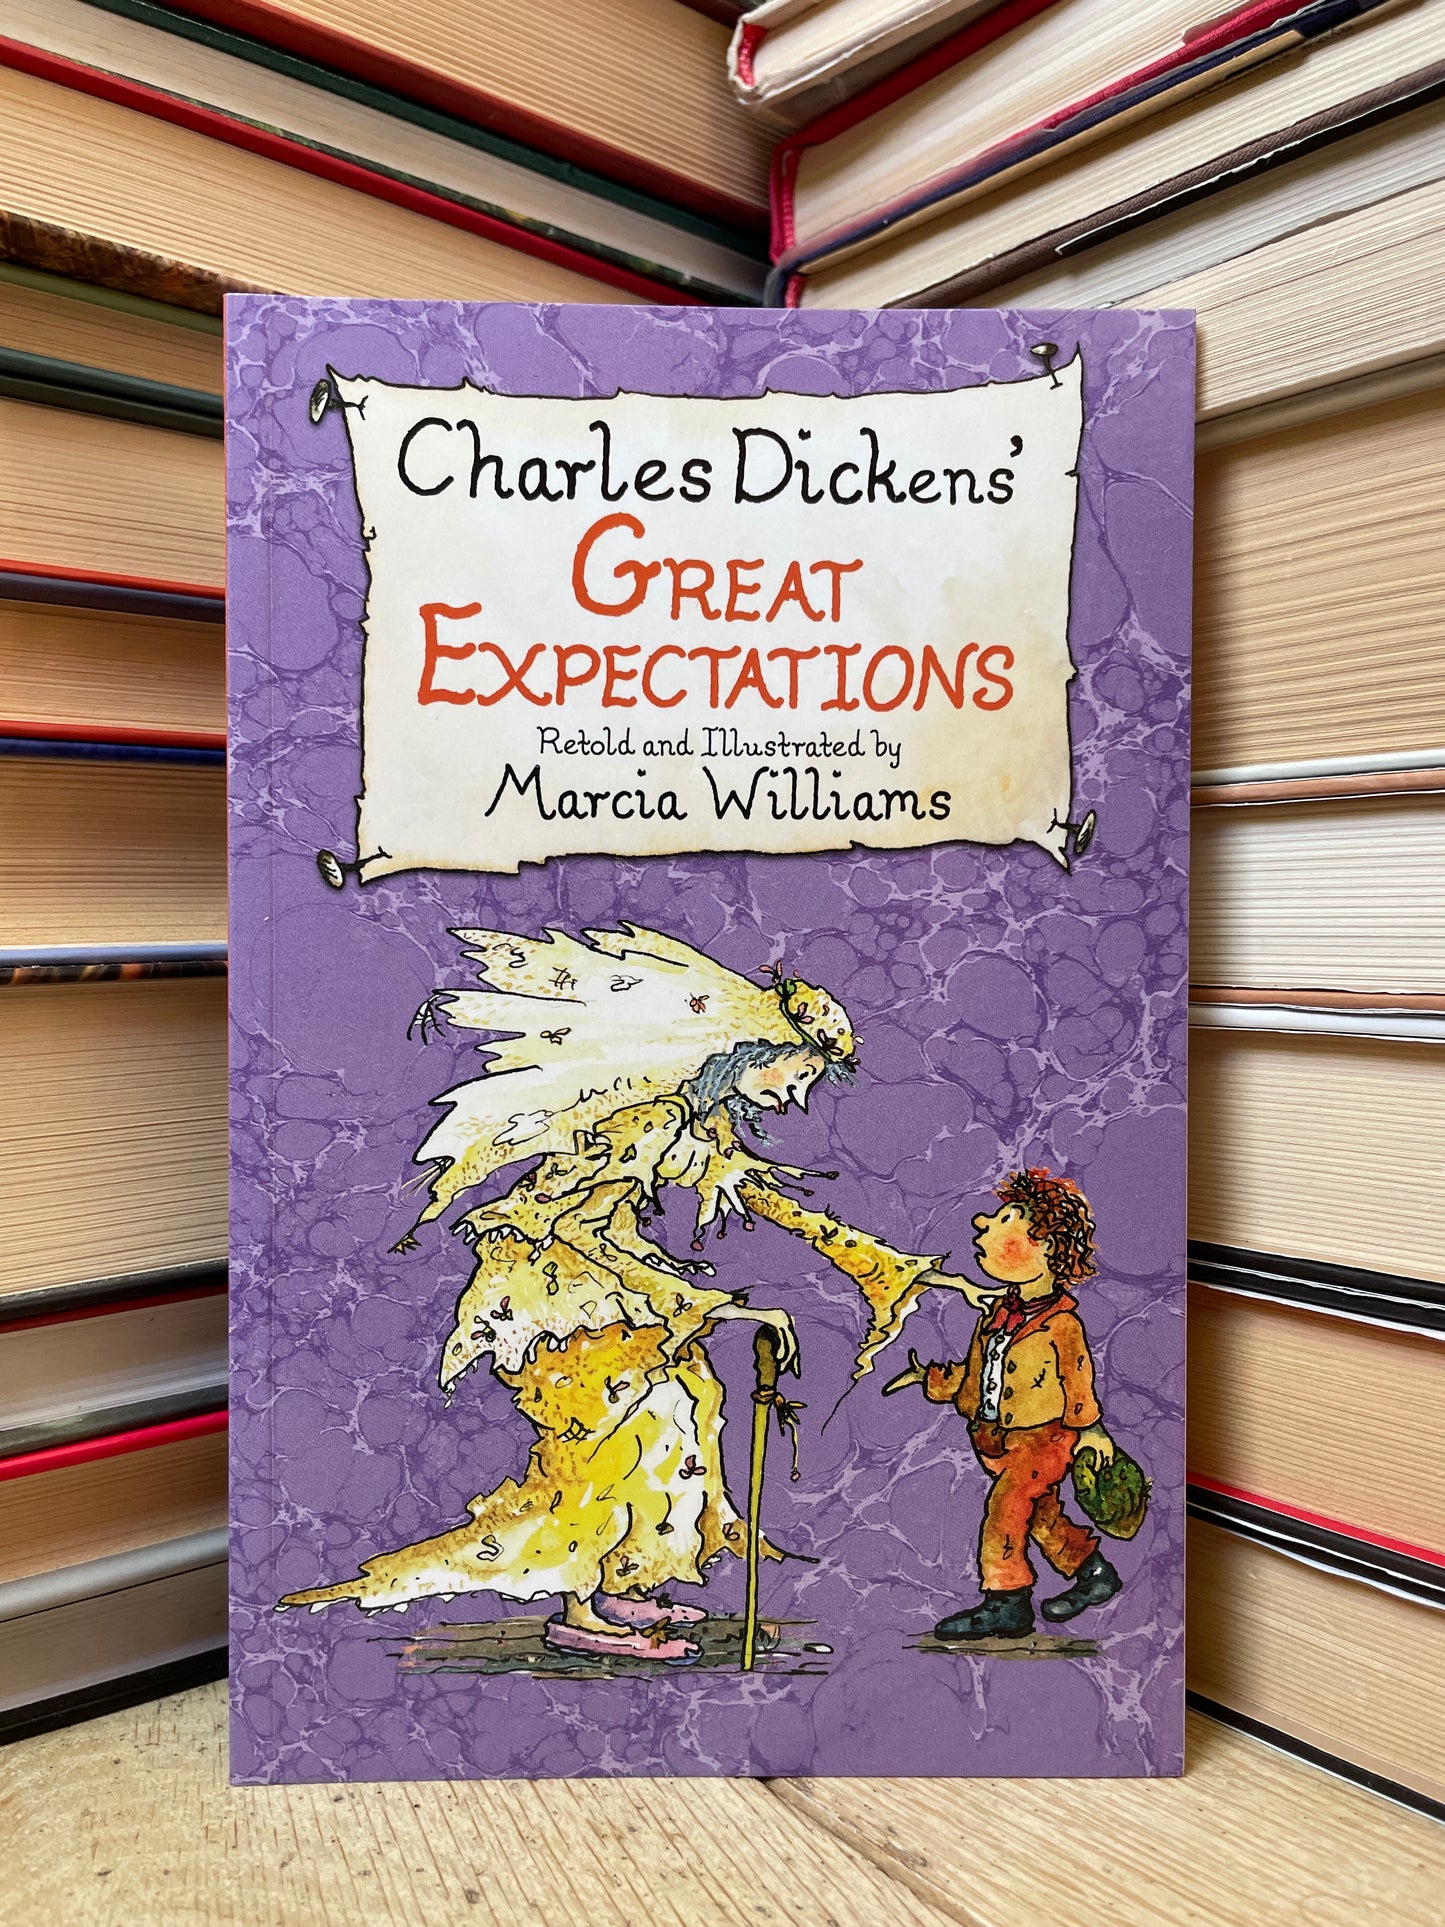 Charles Dickens - Great Expectations (retold by Marcia Williams) (NAUJA)